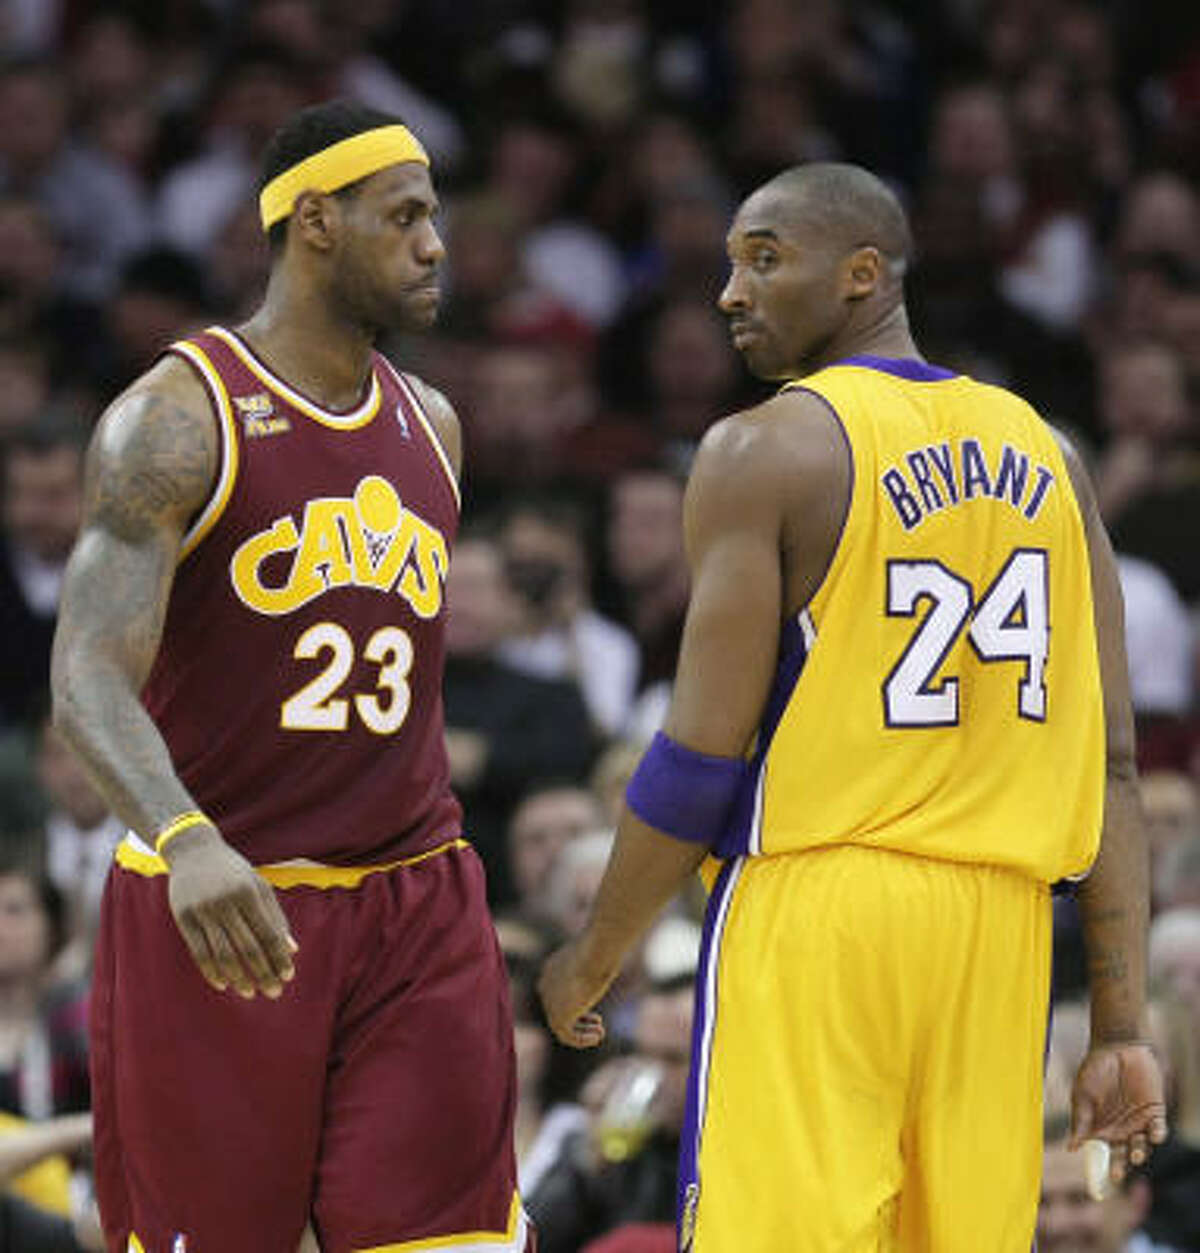 2010: Kobe-LeBron Lakers-Celtics? Been there, done that 11 times in the NBA Finals. What fans want to see is a title series matchup of the league's two foremost talents in L.A.'s Kobe Bryant and Cleveland's LeBron James. Alas, James and his balky elbow came up short against Boston in the Eastern Conference semis, so we'll keep waiting (and waiting and waiting if LeBron signs with the Knicks).